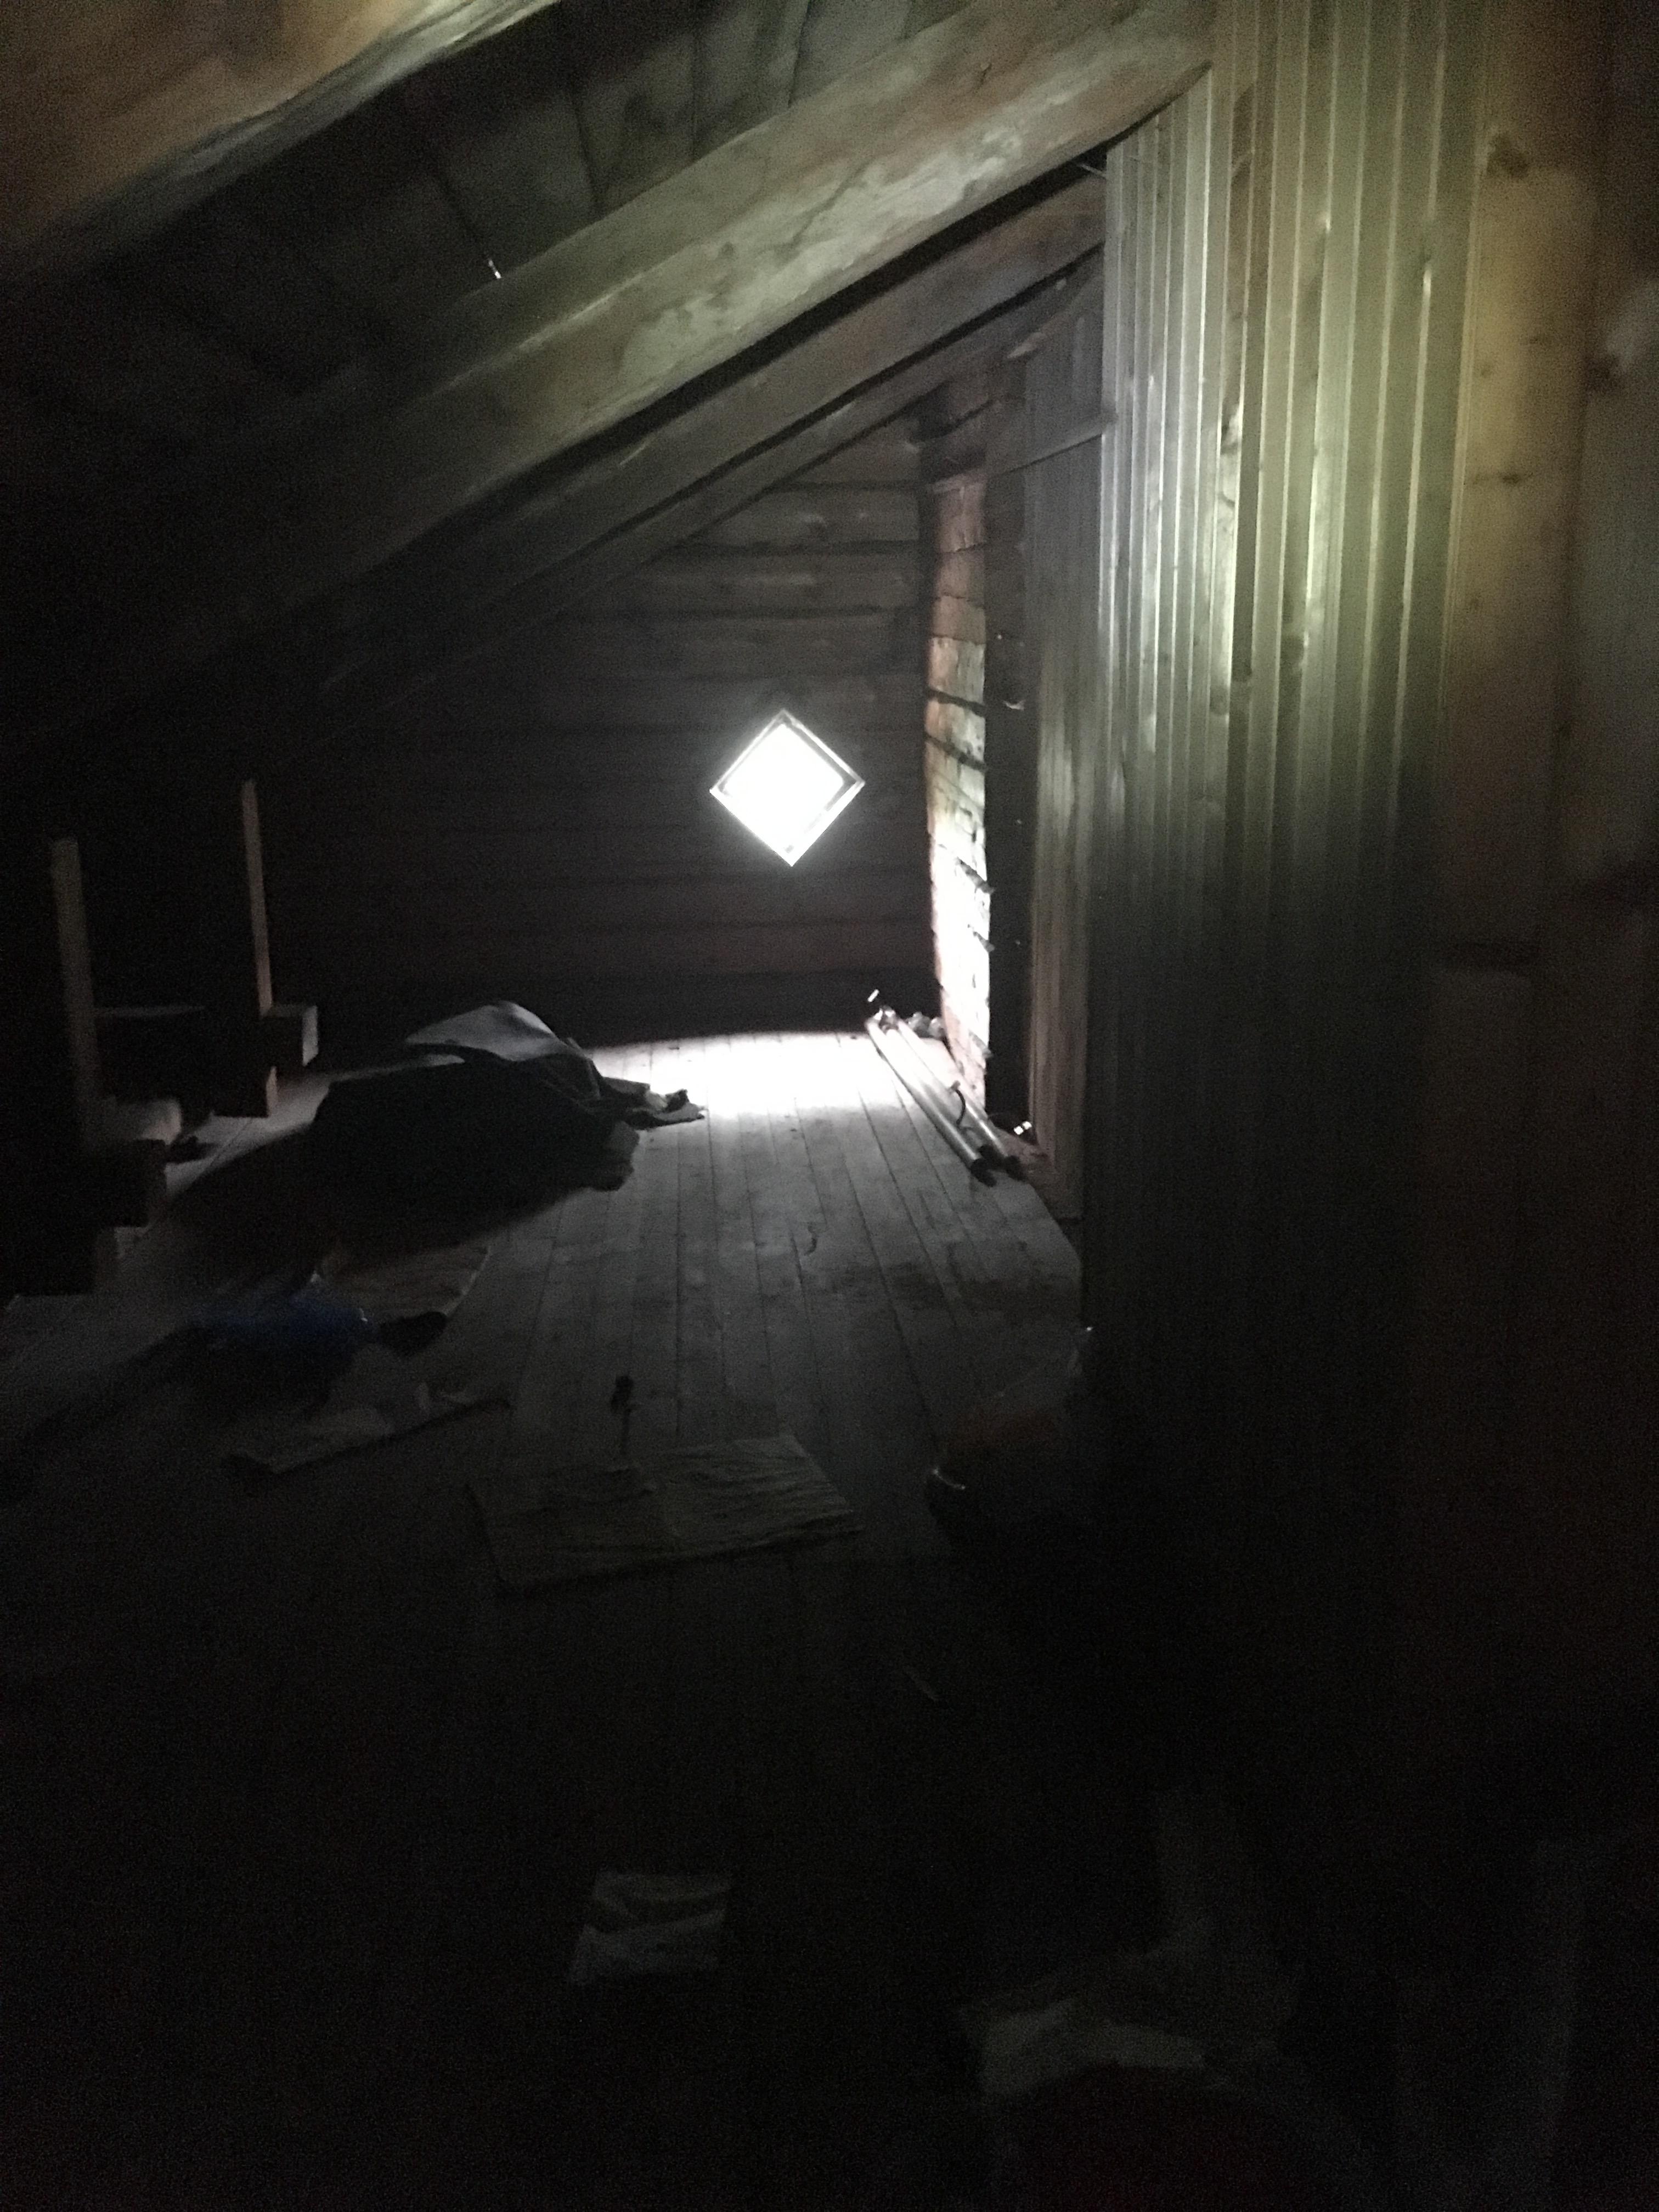 Another view of the attic.